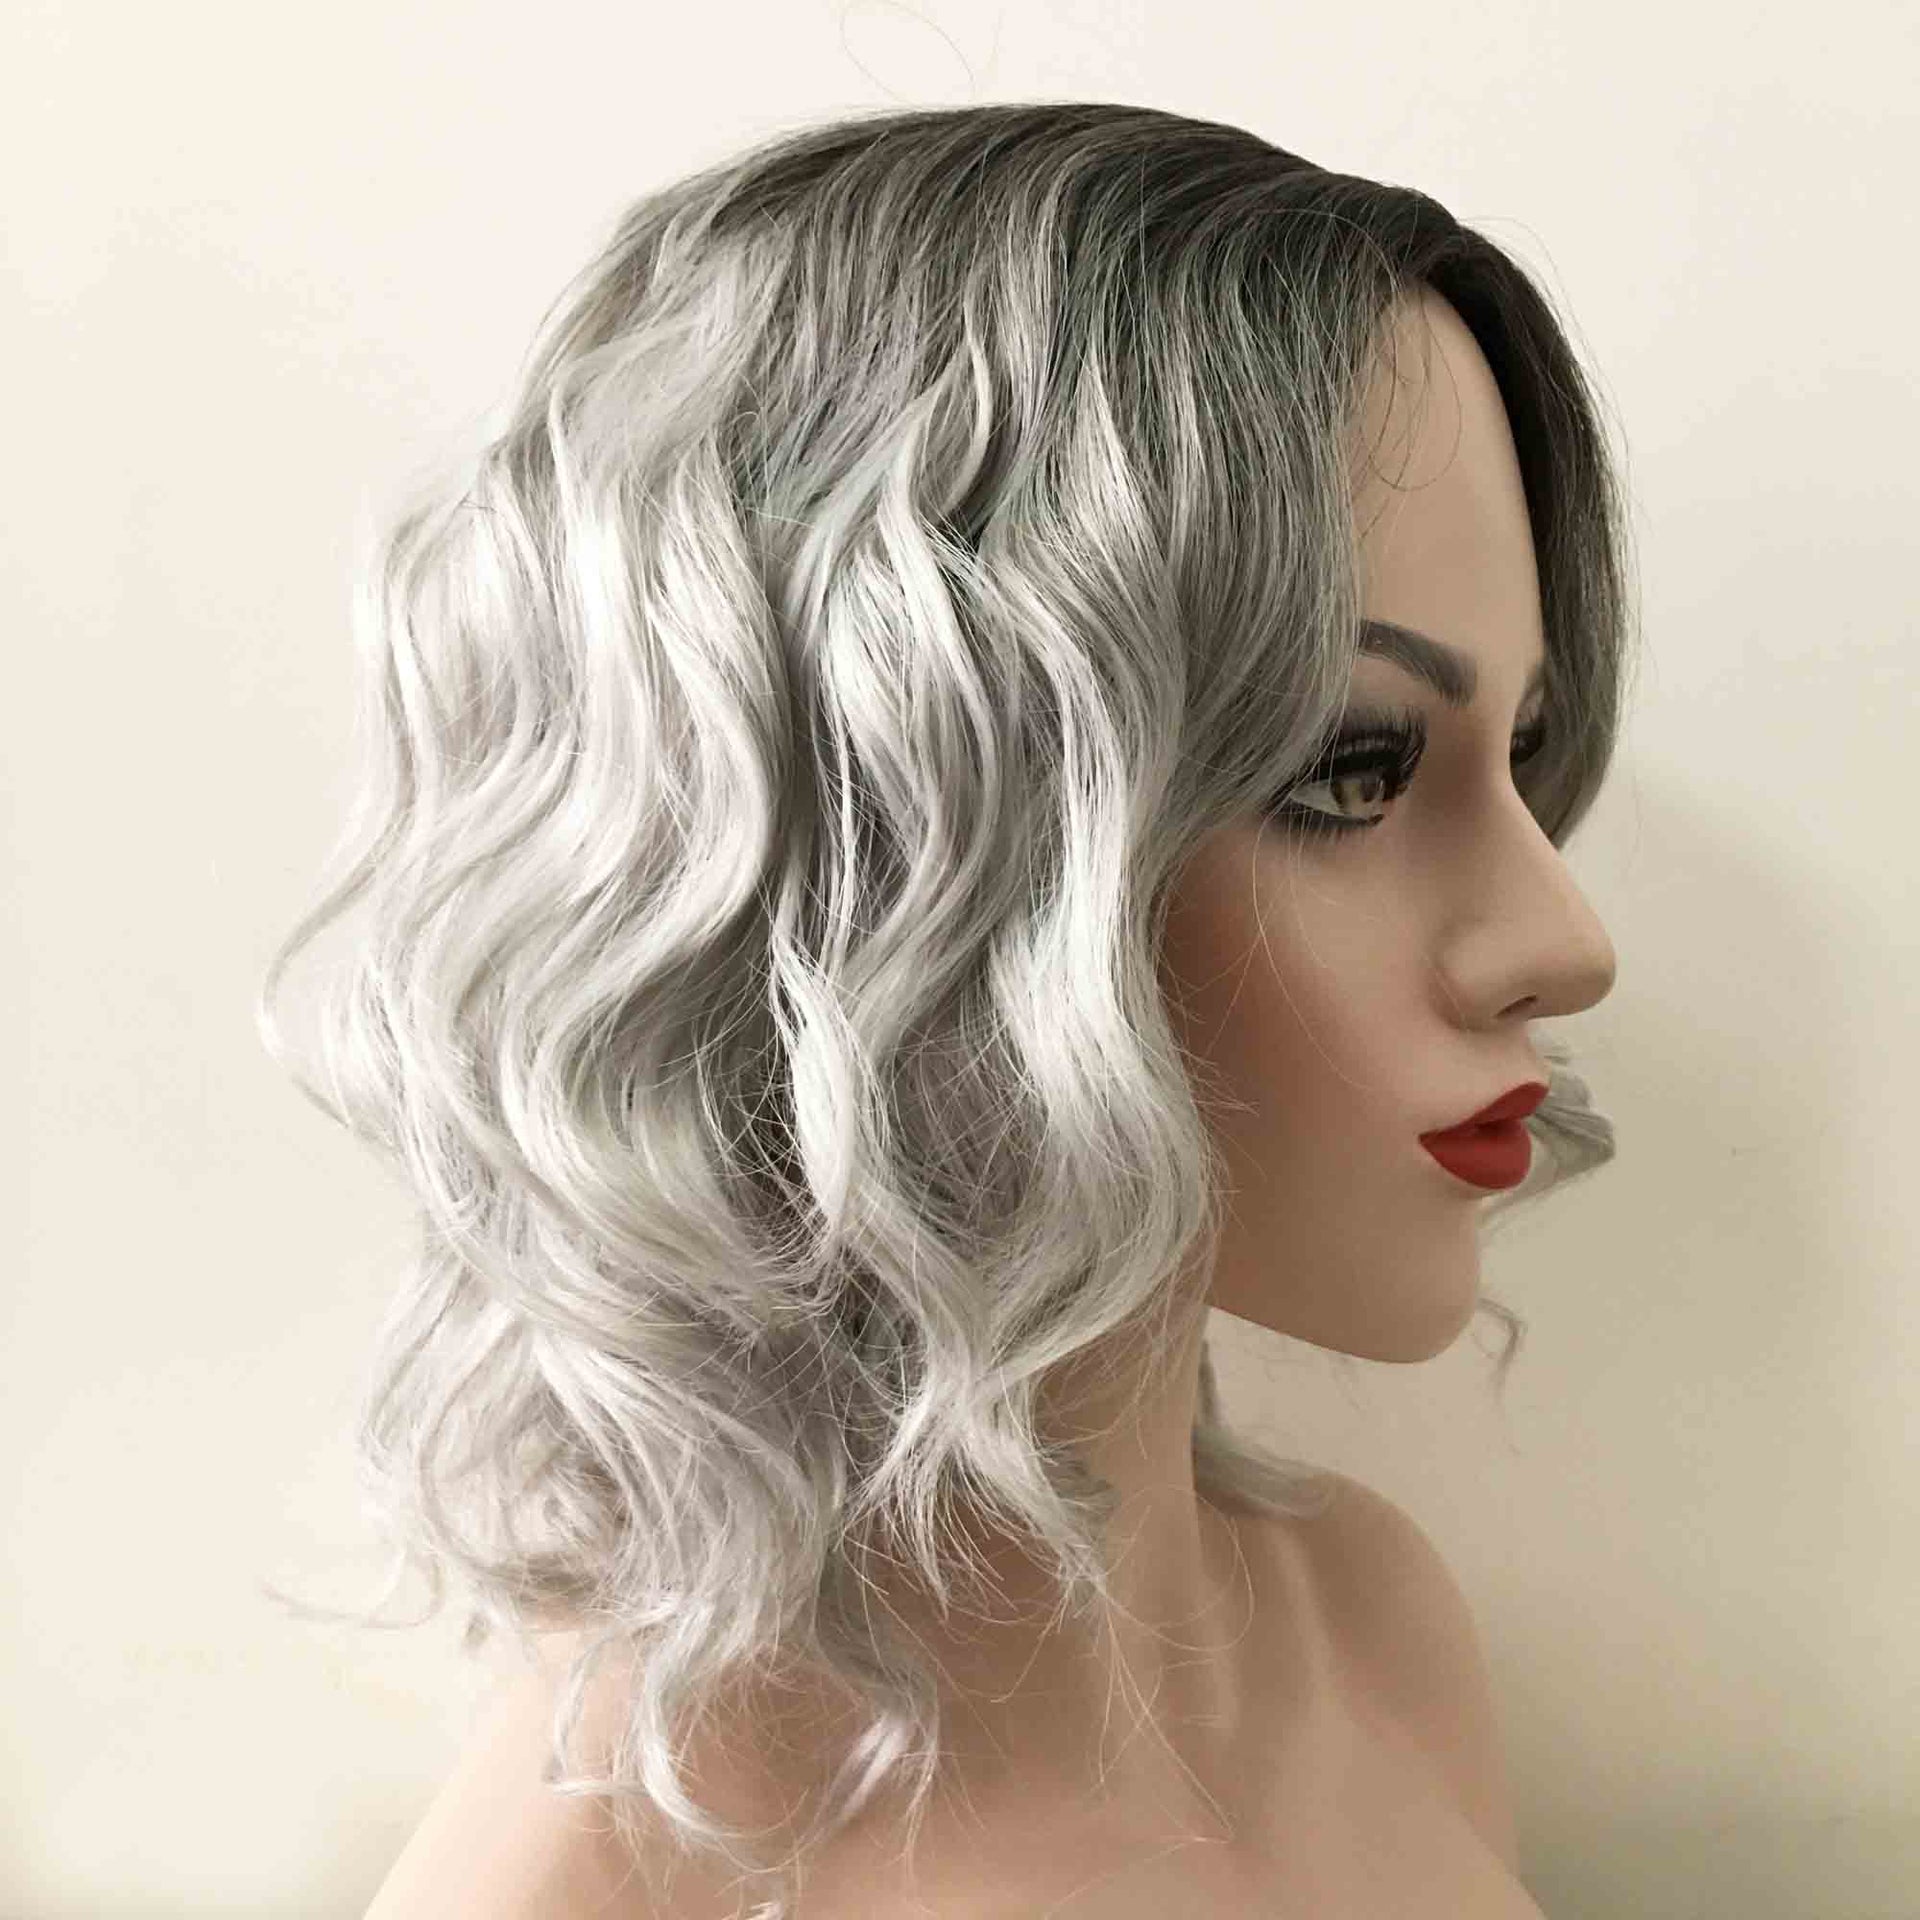 nevermindyrhead Women Grey Ombre Dark Root Short Curly Middle Part Wig